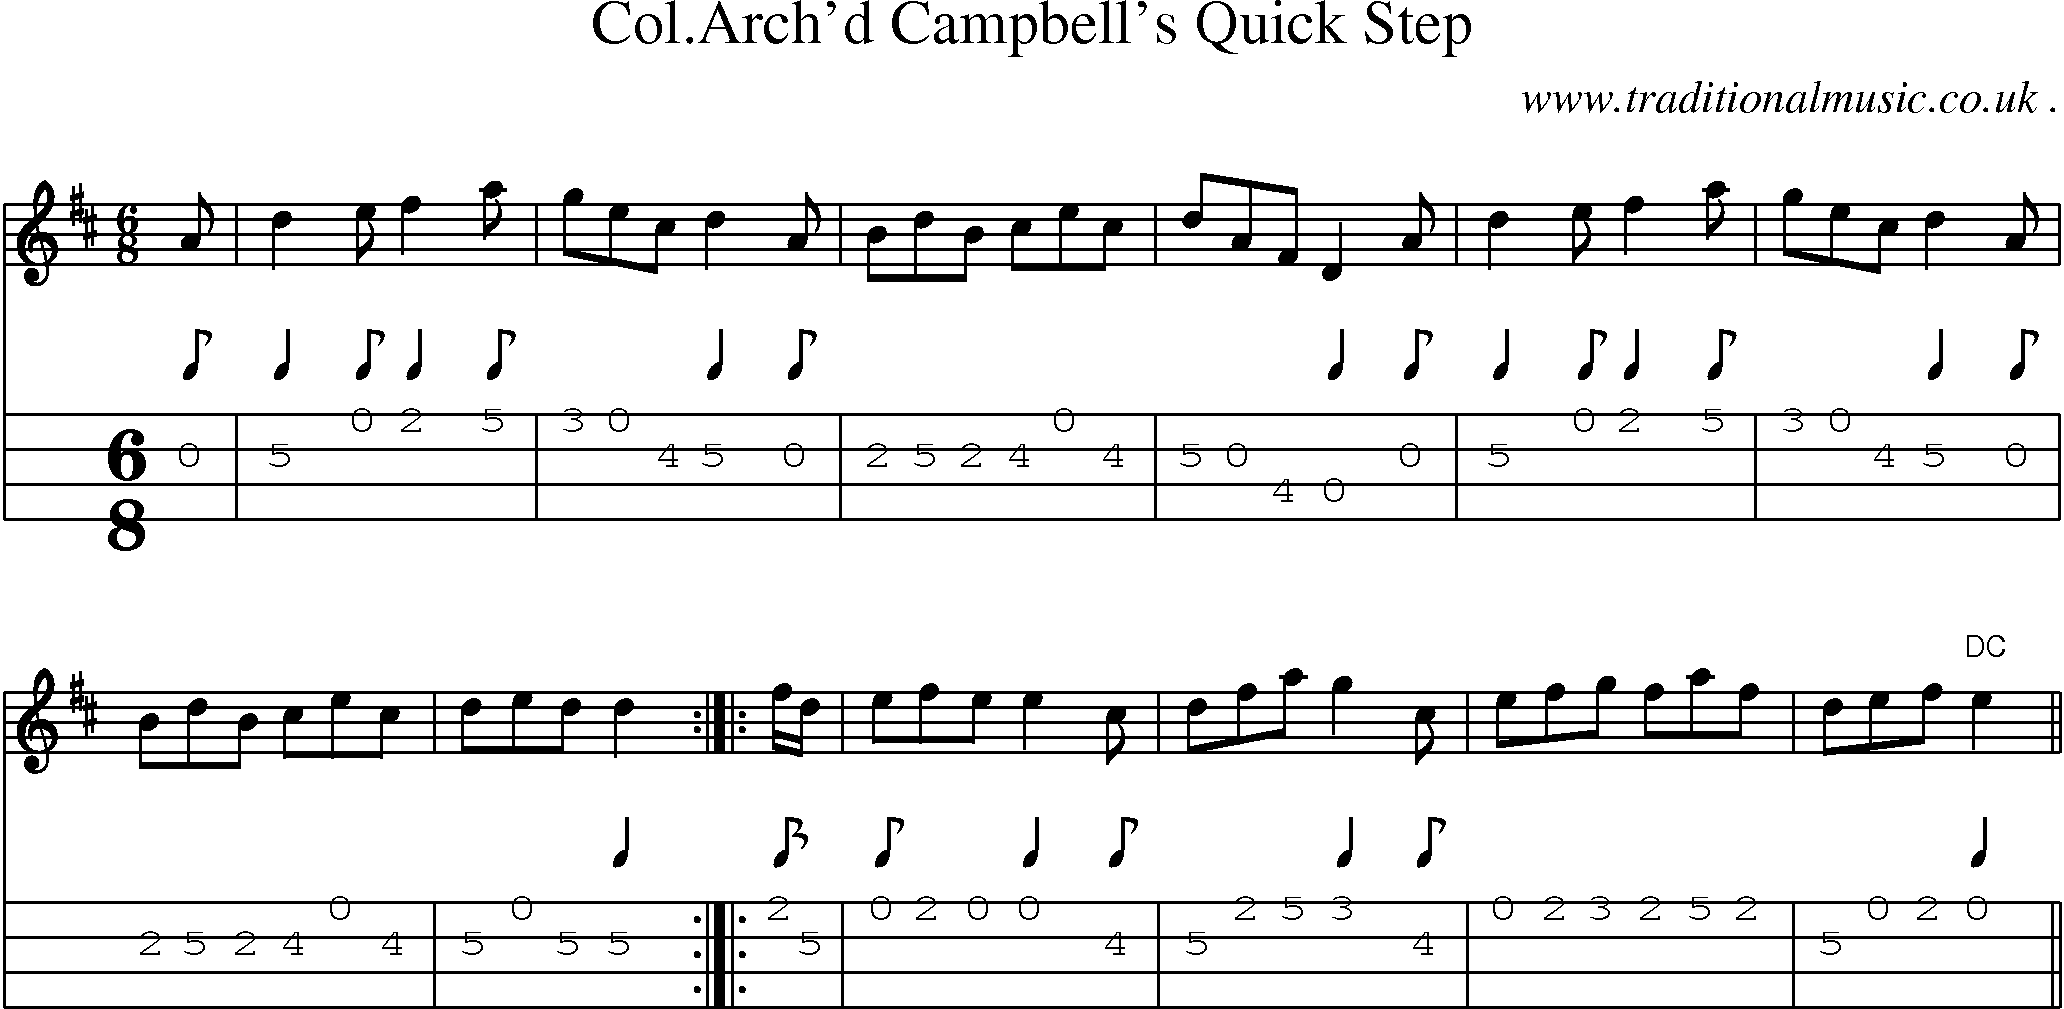 Sheet-Music and Mandolin Tabs for Colarchd Campbells Quick Step